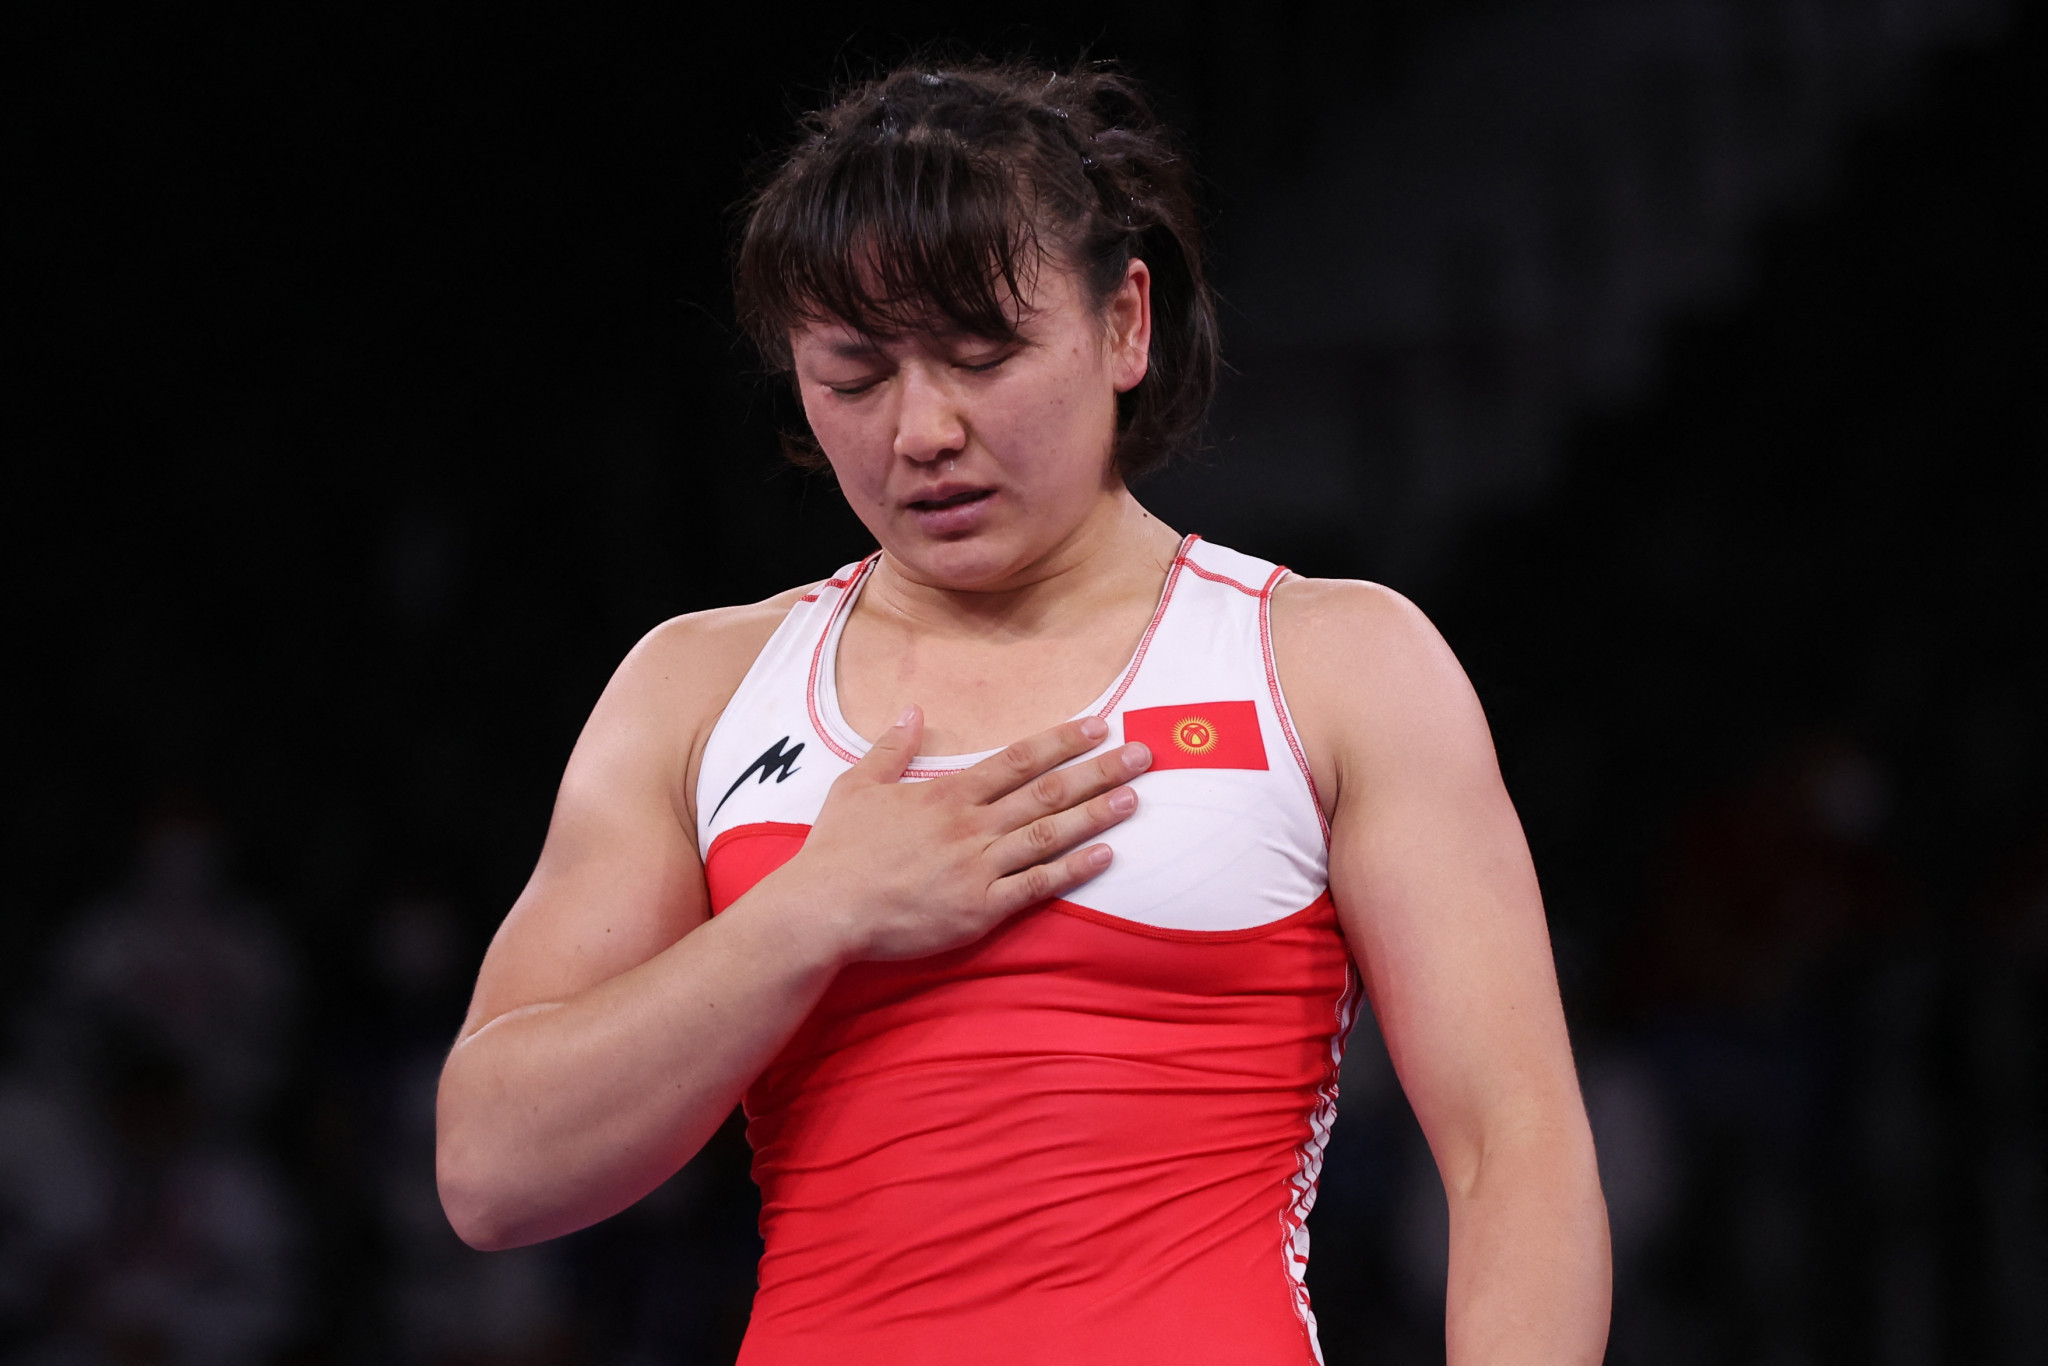 Meerim Zhumanazarova finished second in the under-68kg competition ©Getty Images